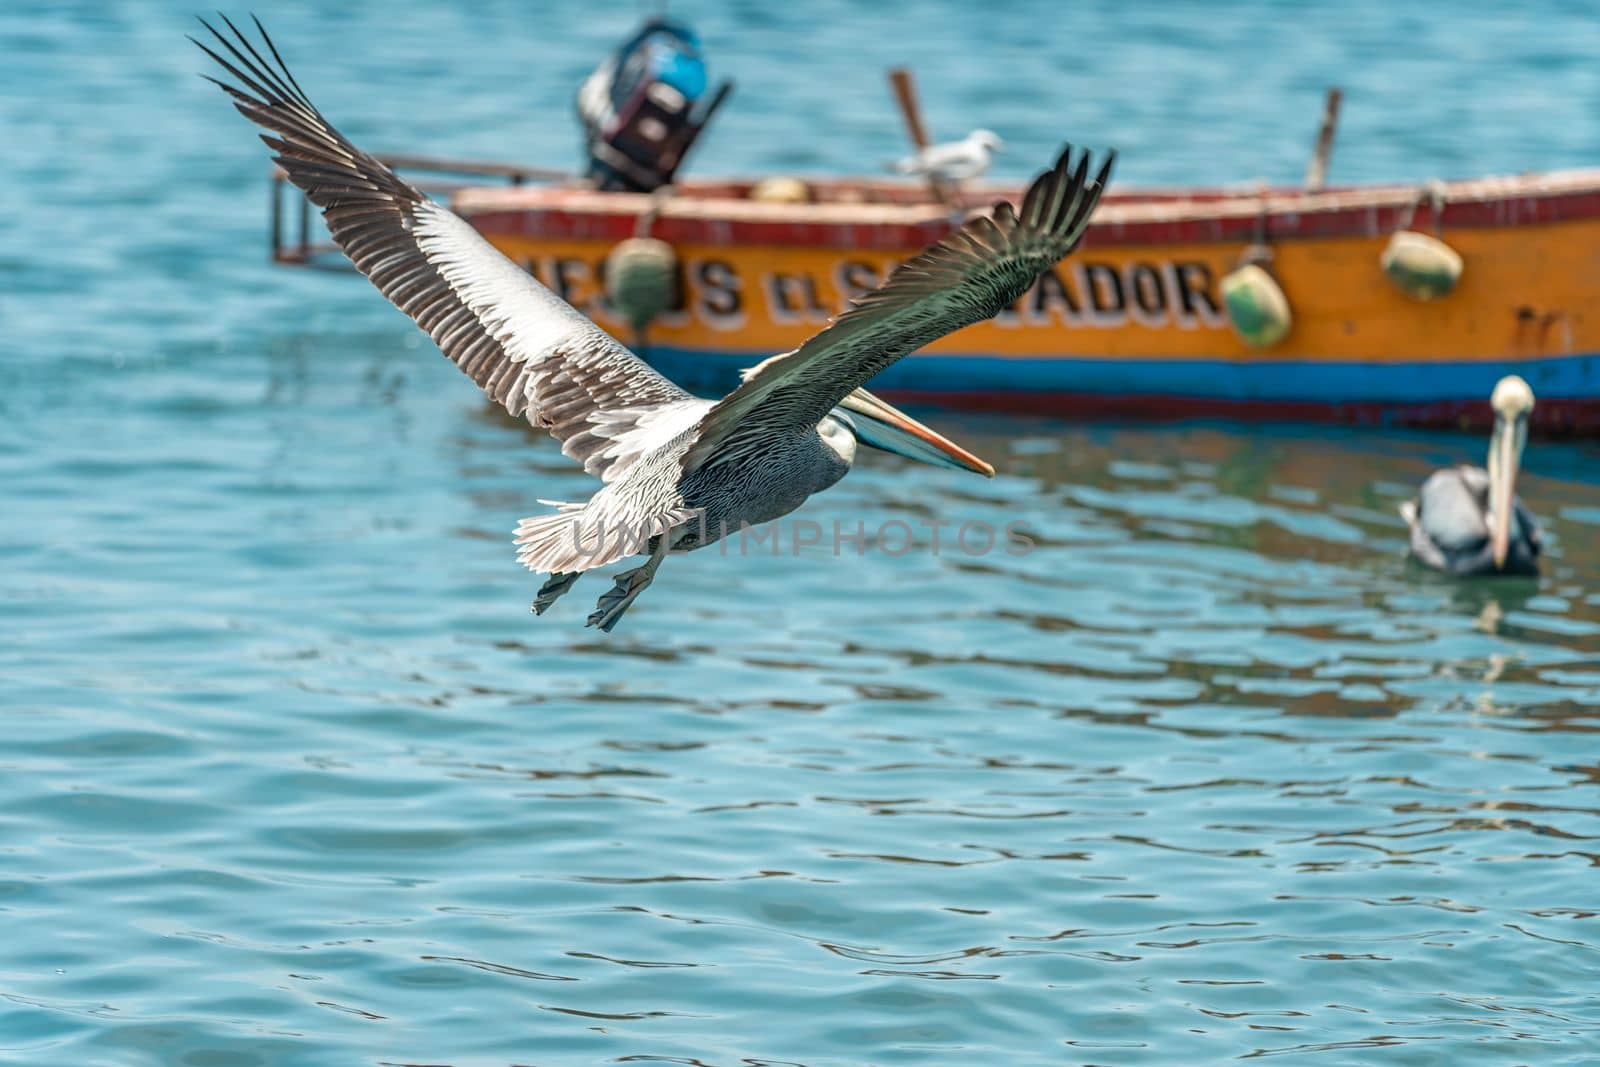 Peru - September 21, 2022: A pelican flies over the ocean near fishing boats by Edophoto